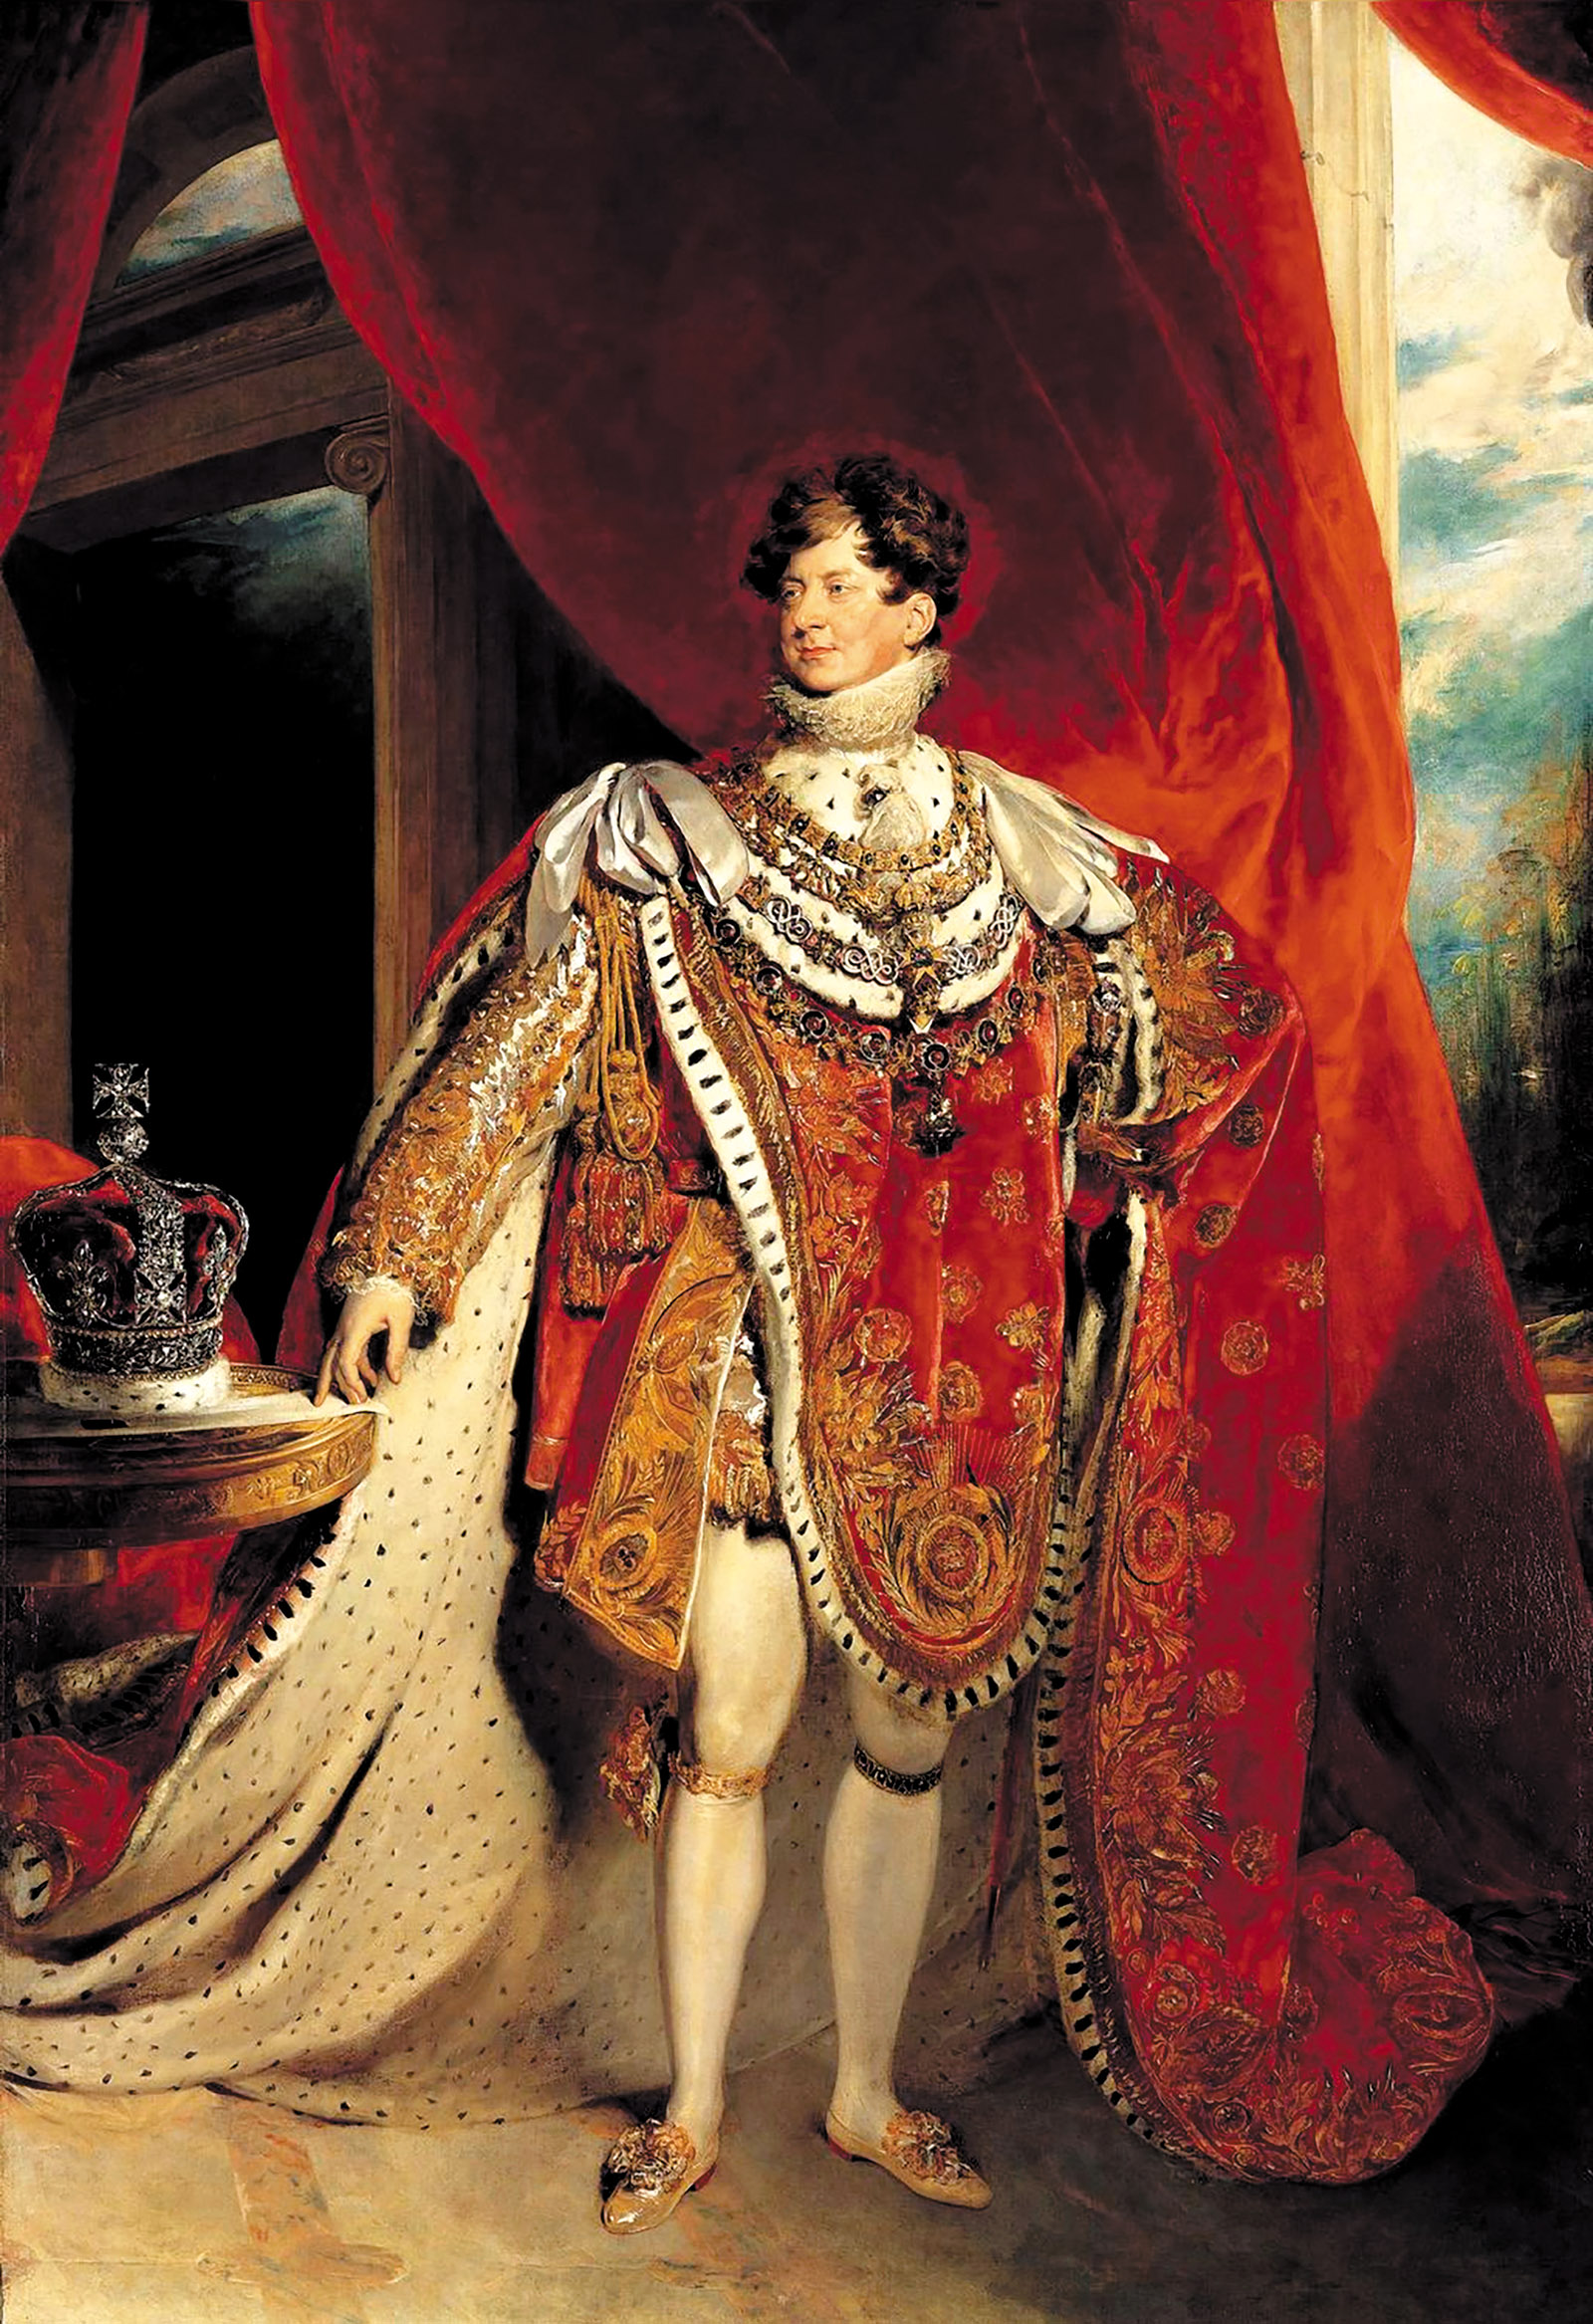 Coronation portrait of George IV by Thomas Lawrence, 1821